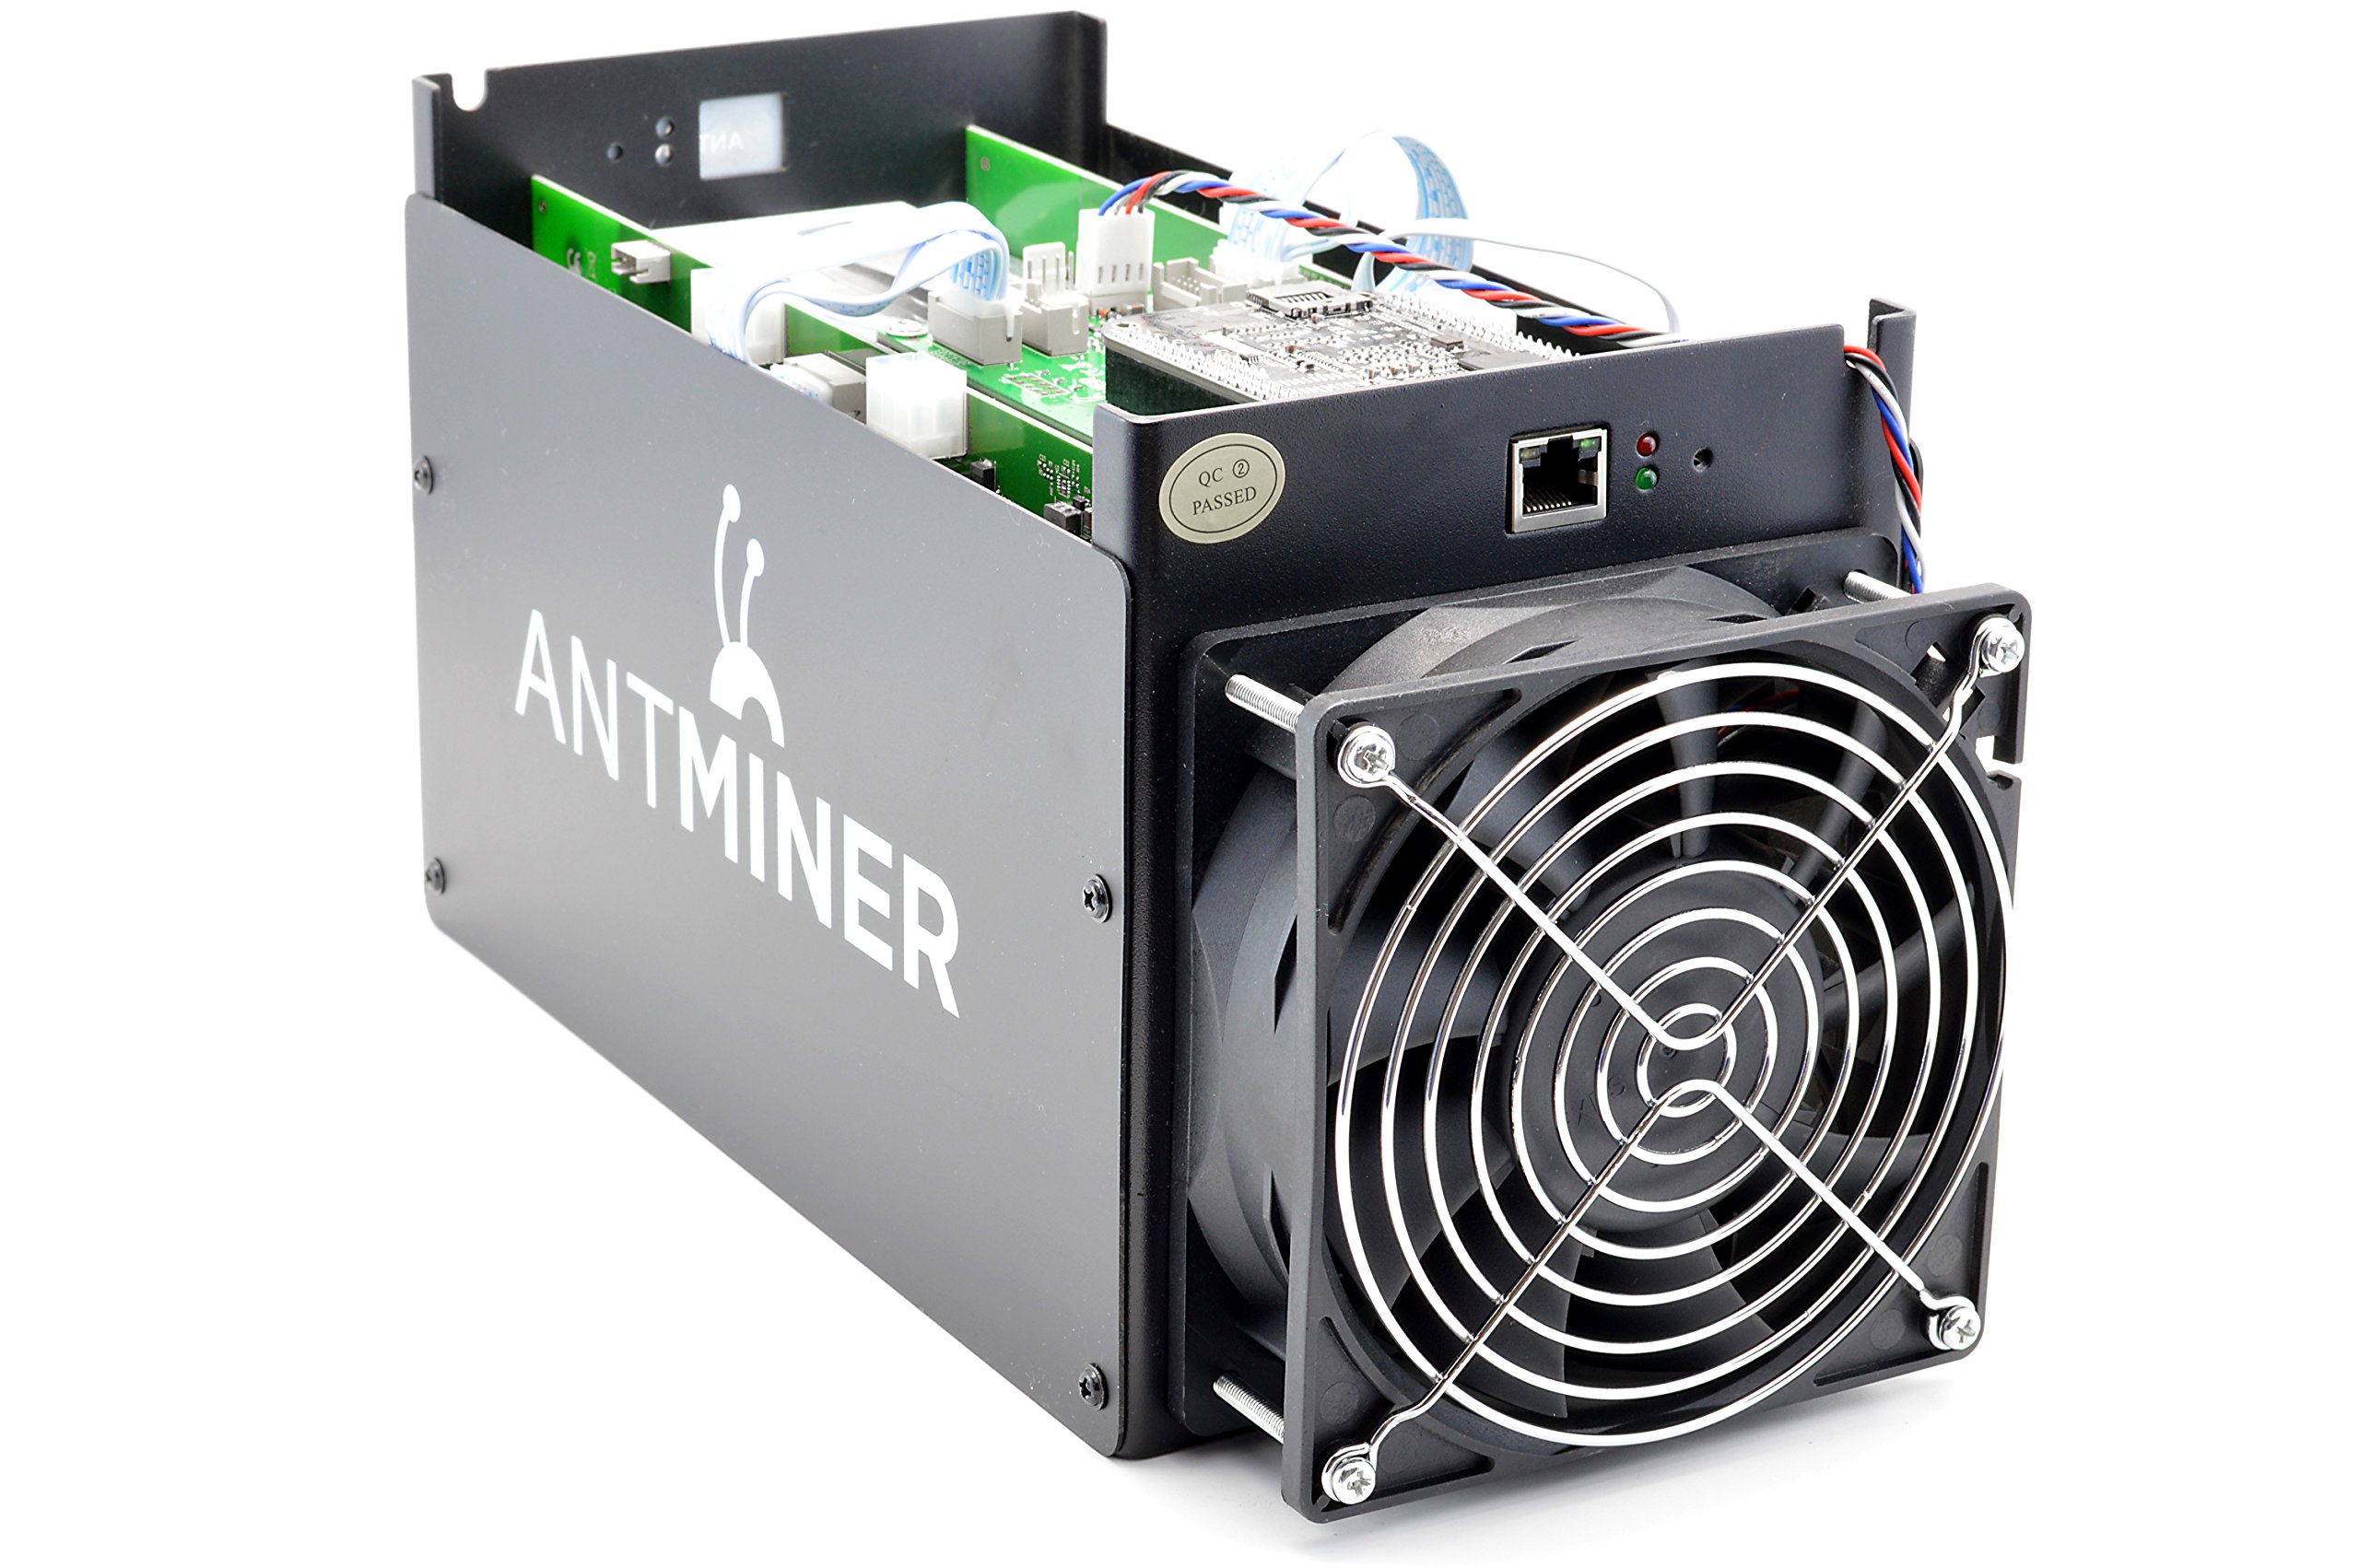 Antminer S5 Review: A miner for home and farm alike!